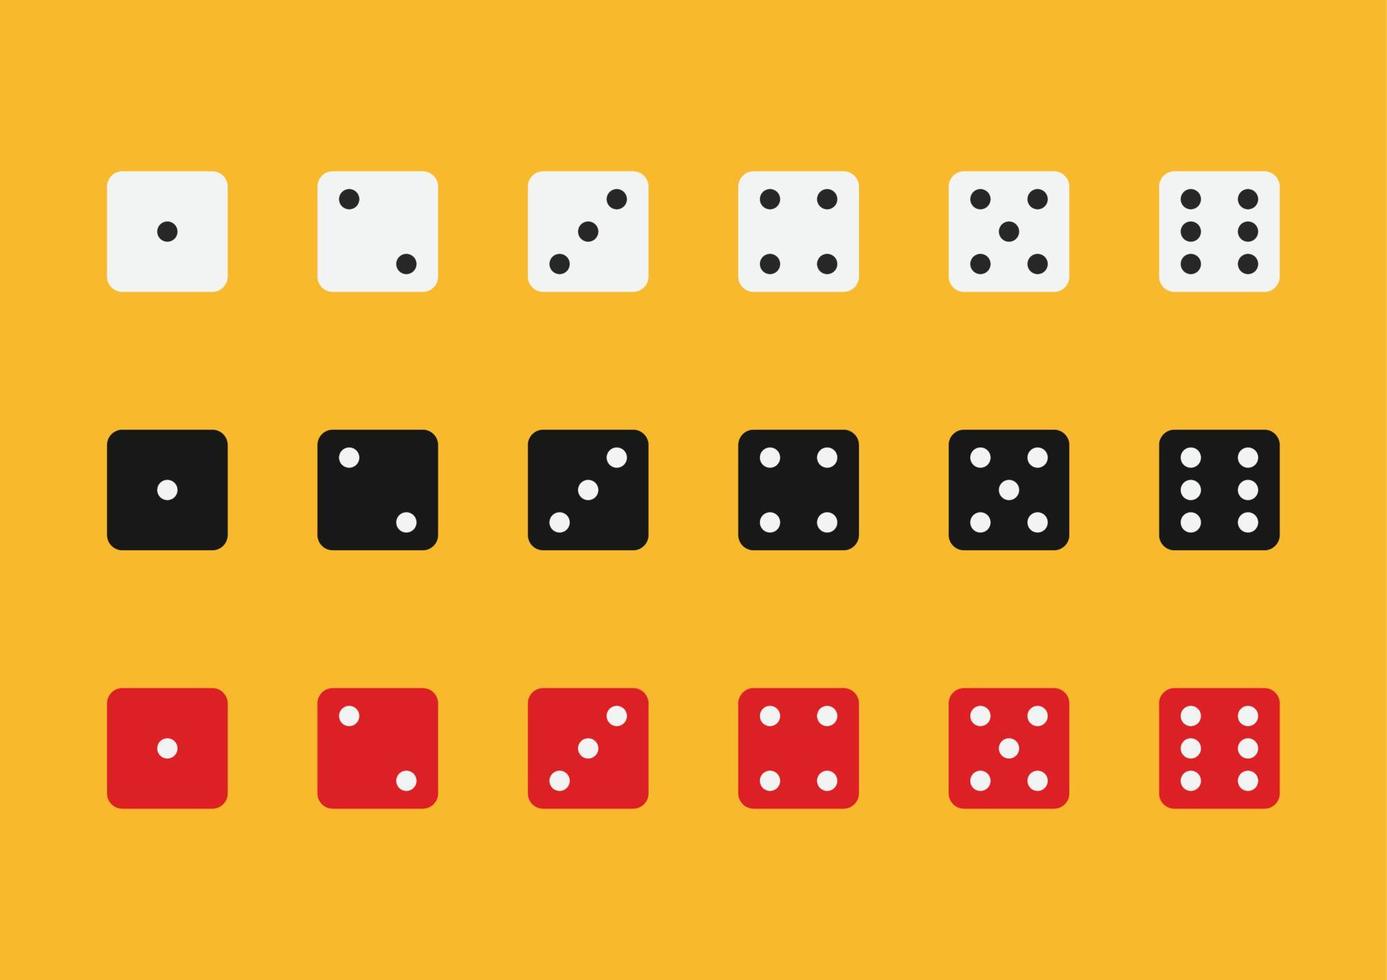 Dice in flat style design from one to six vector